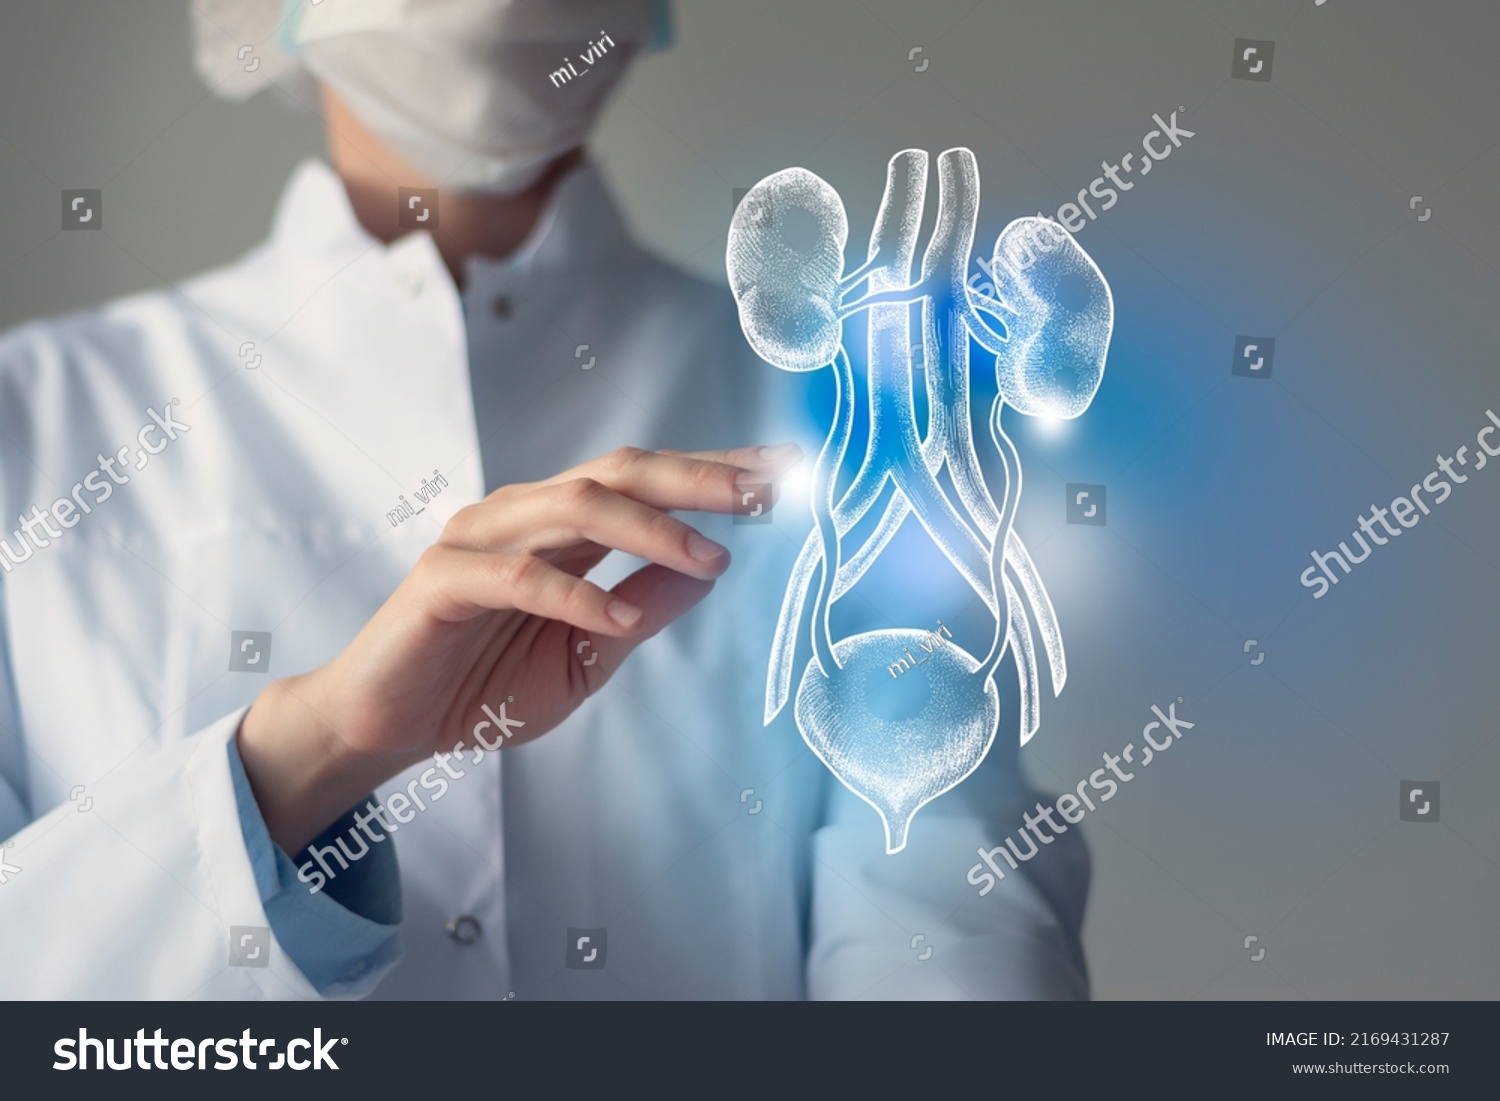 Female doctor touches virtual Bladder and Kidneys in hand. Blurred photo, handrawn human organ, highlighted blue as symbol of recovery. Healthcare hospital service concept stock photo #2169431287